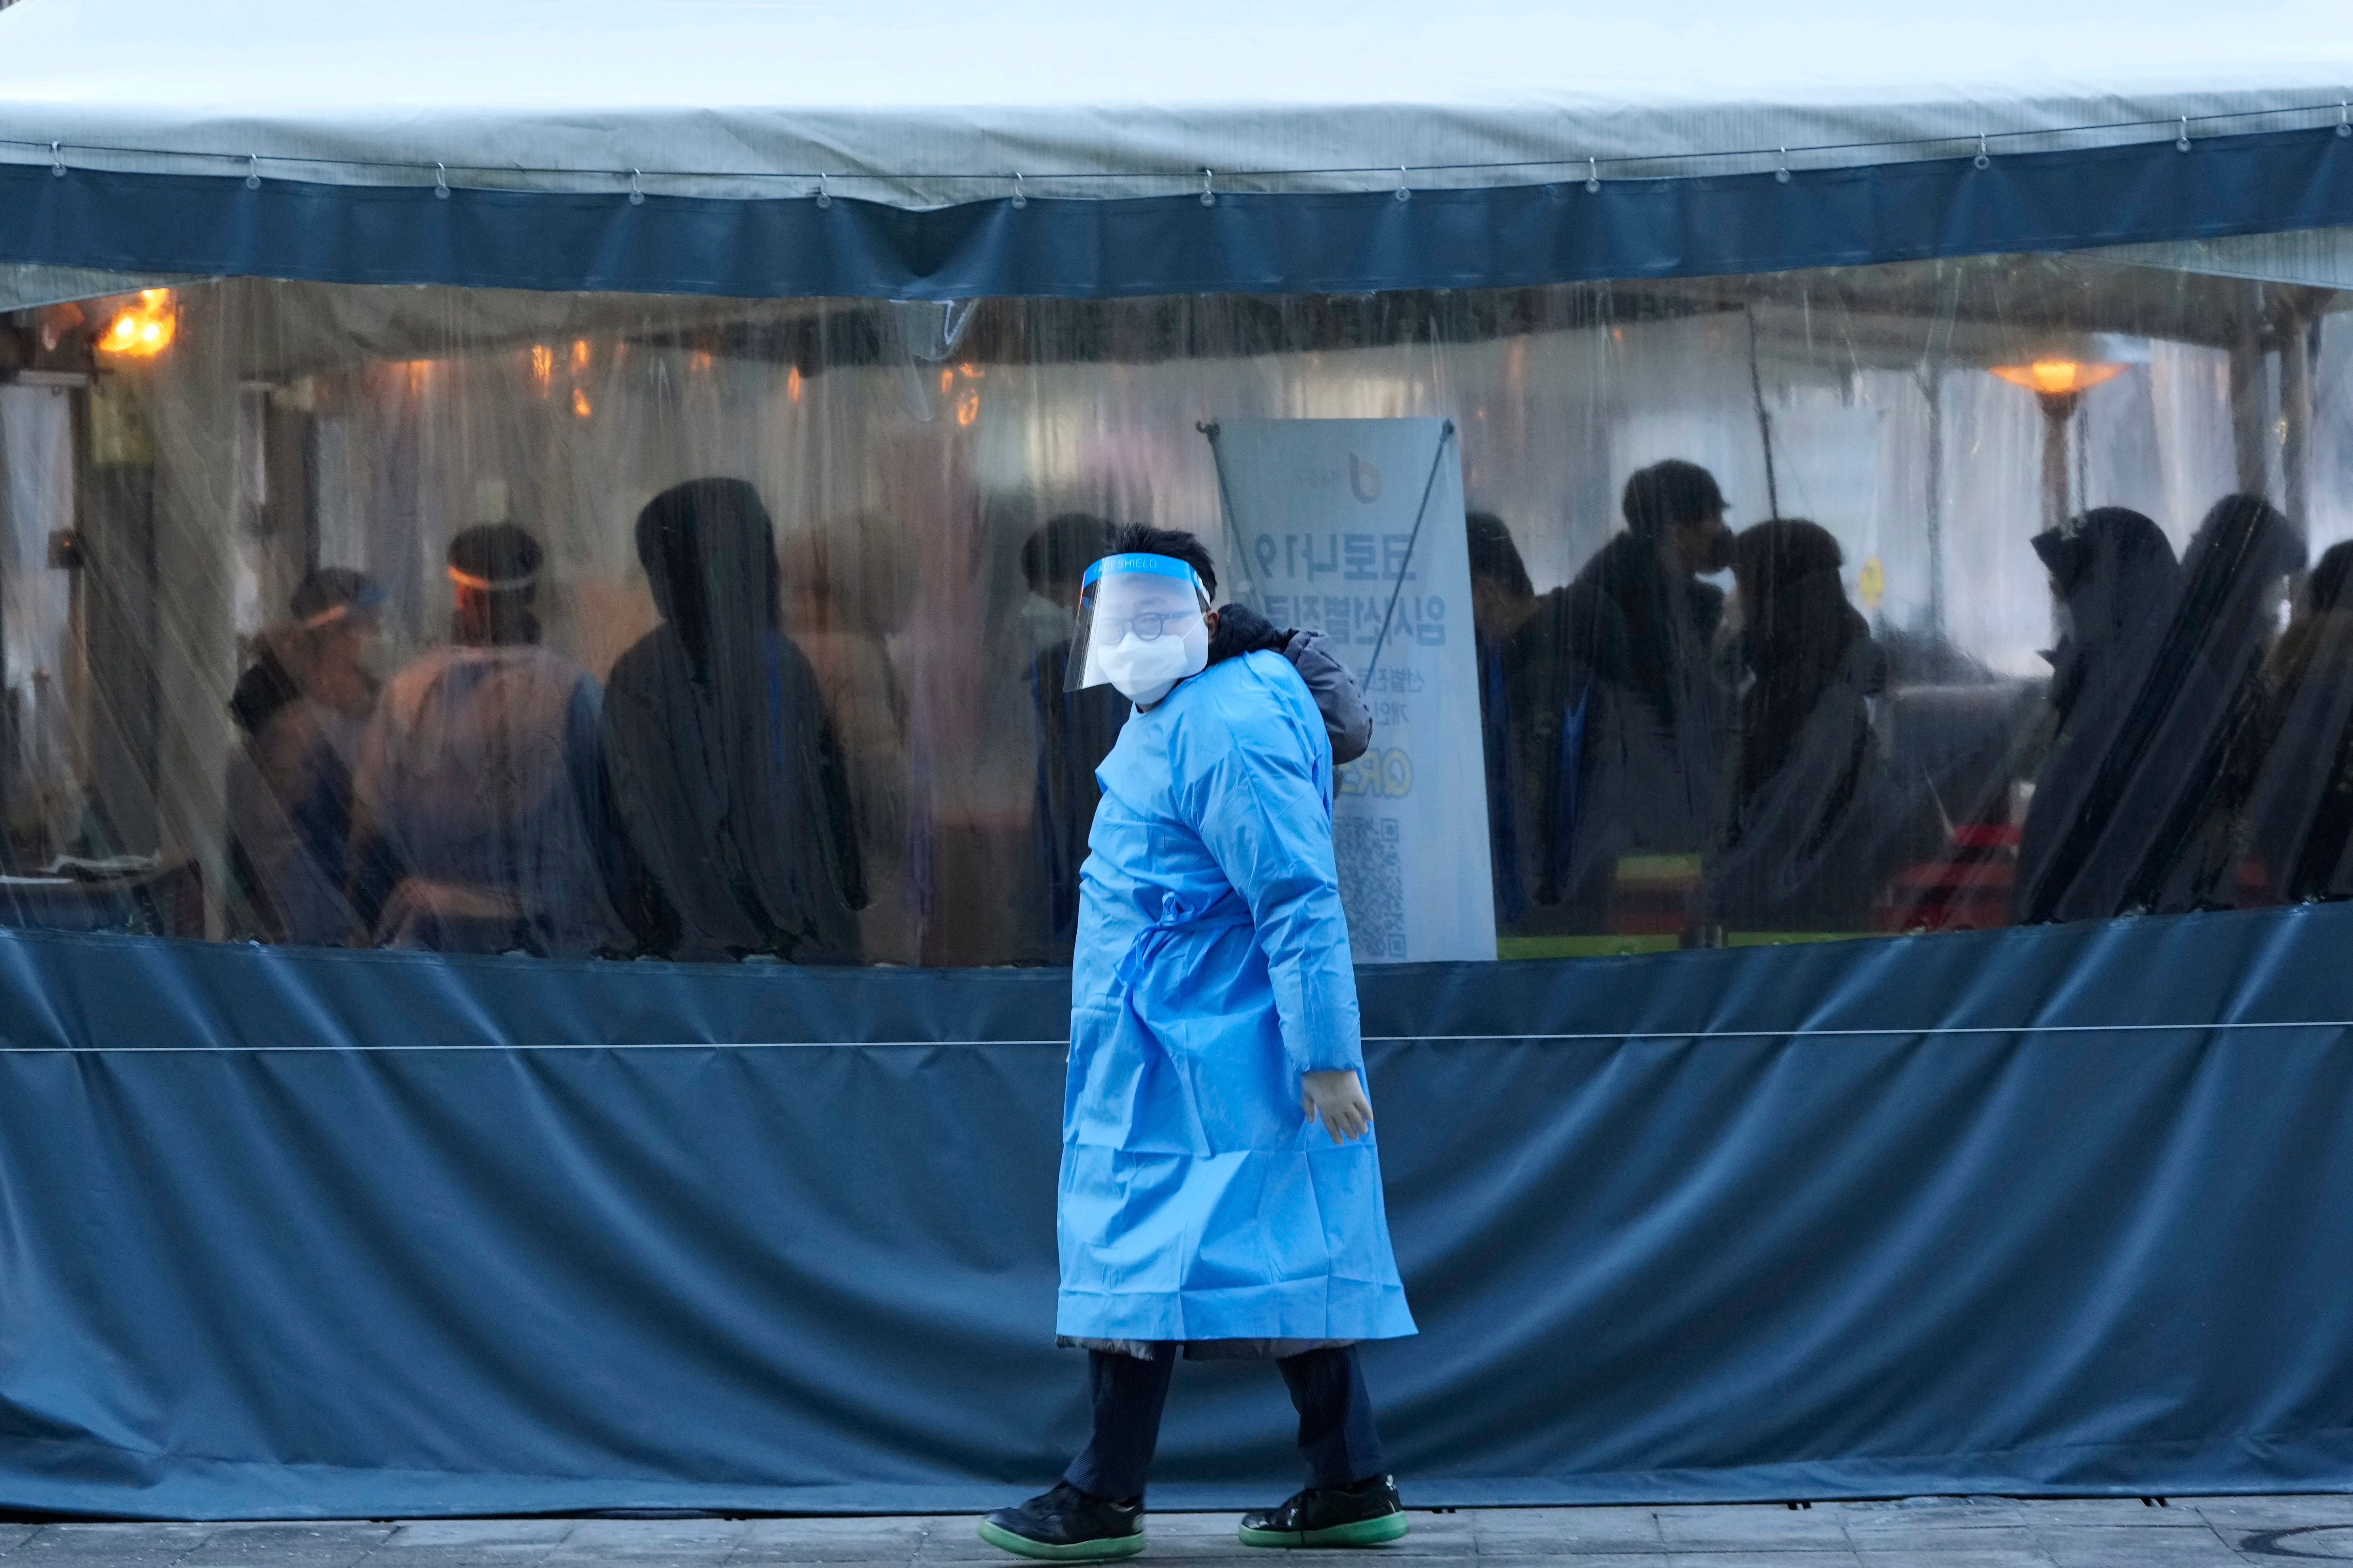 A medical worker passes by people as they wait for their coronavirus tests at a makeshift testing site in Seoul, South Korea